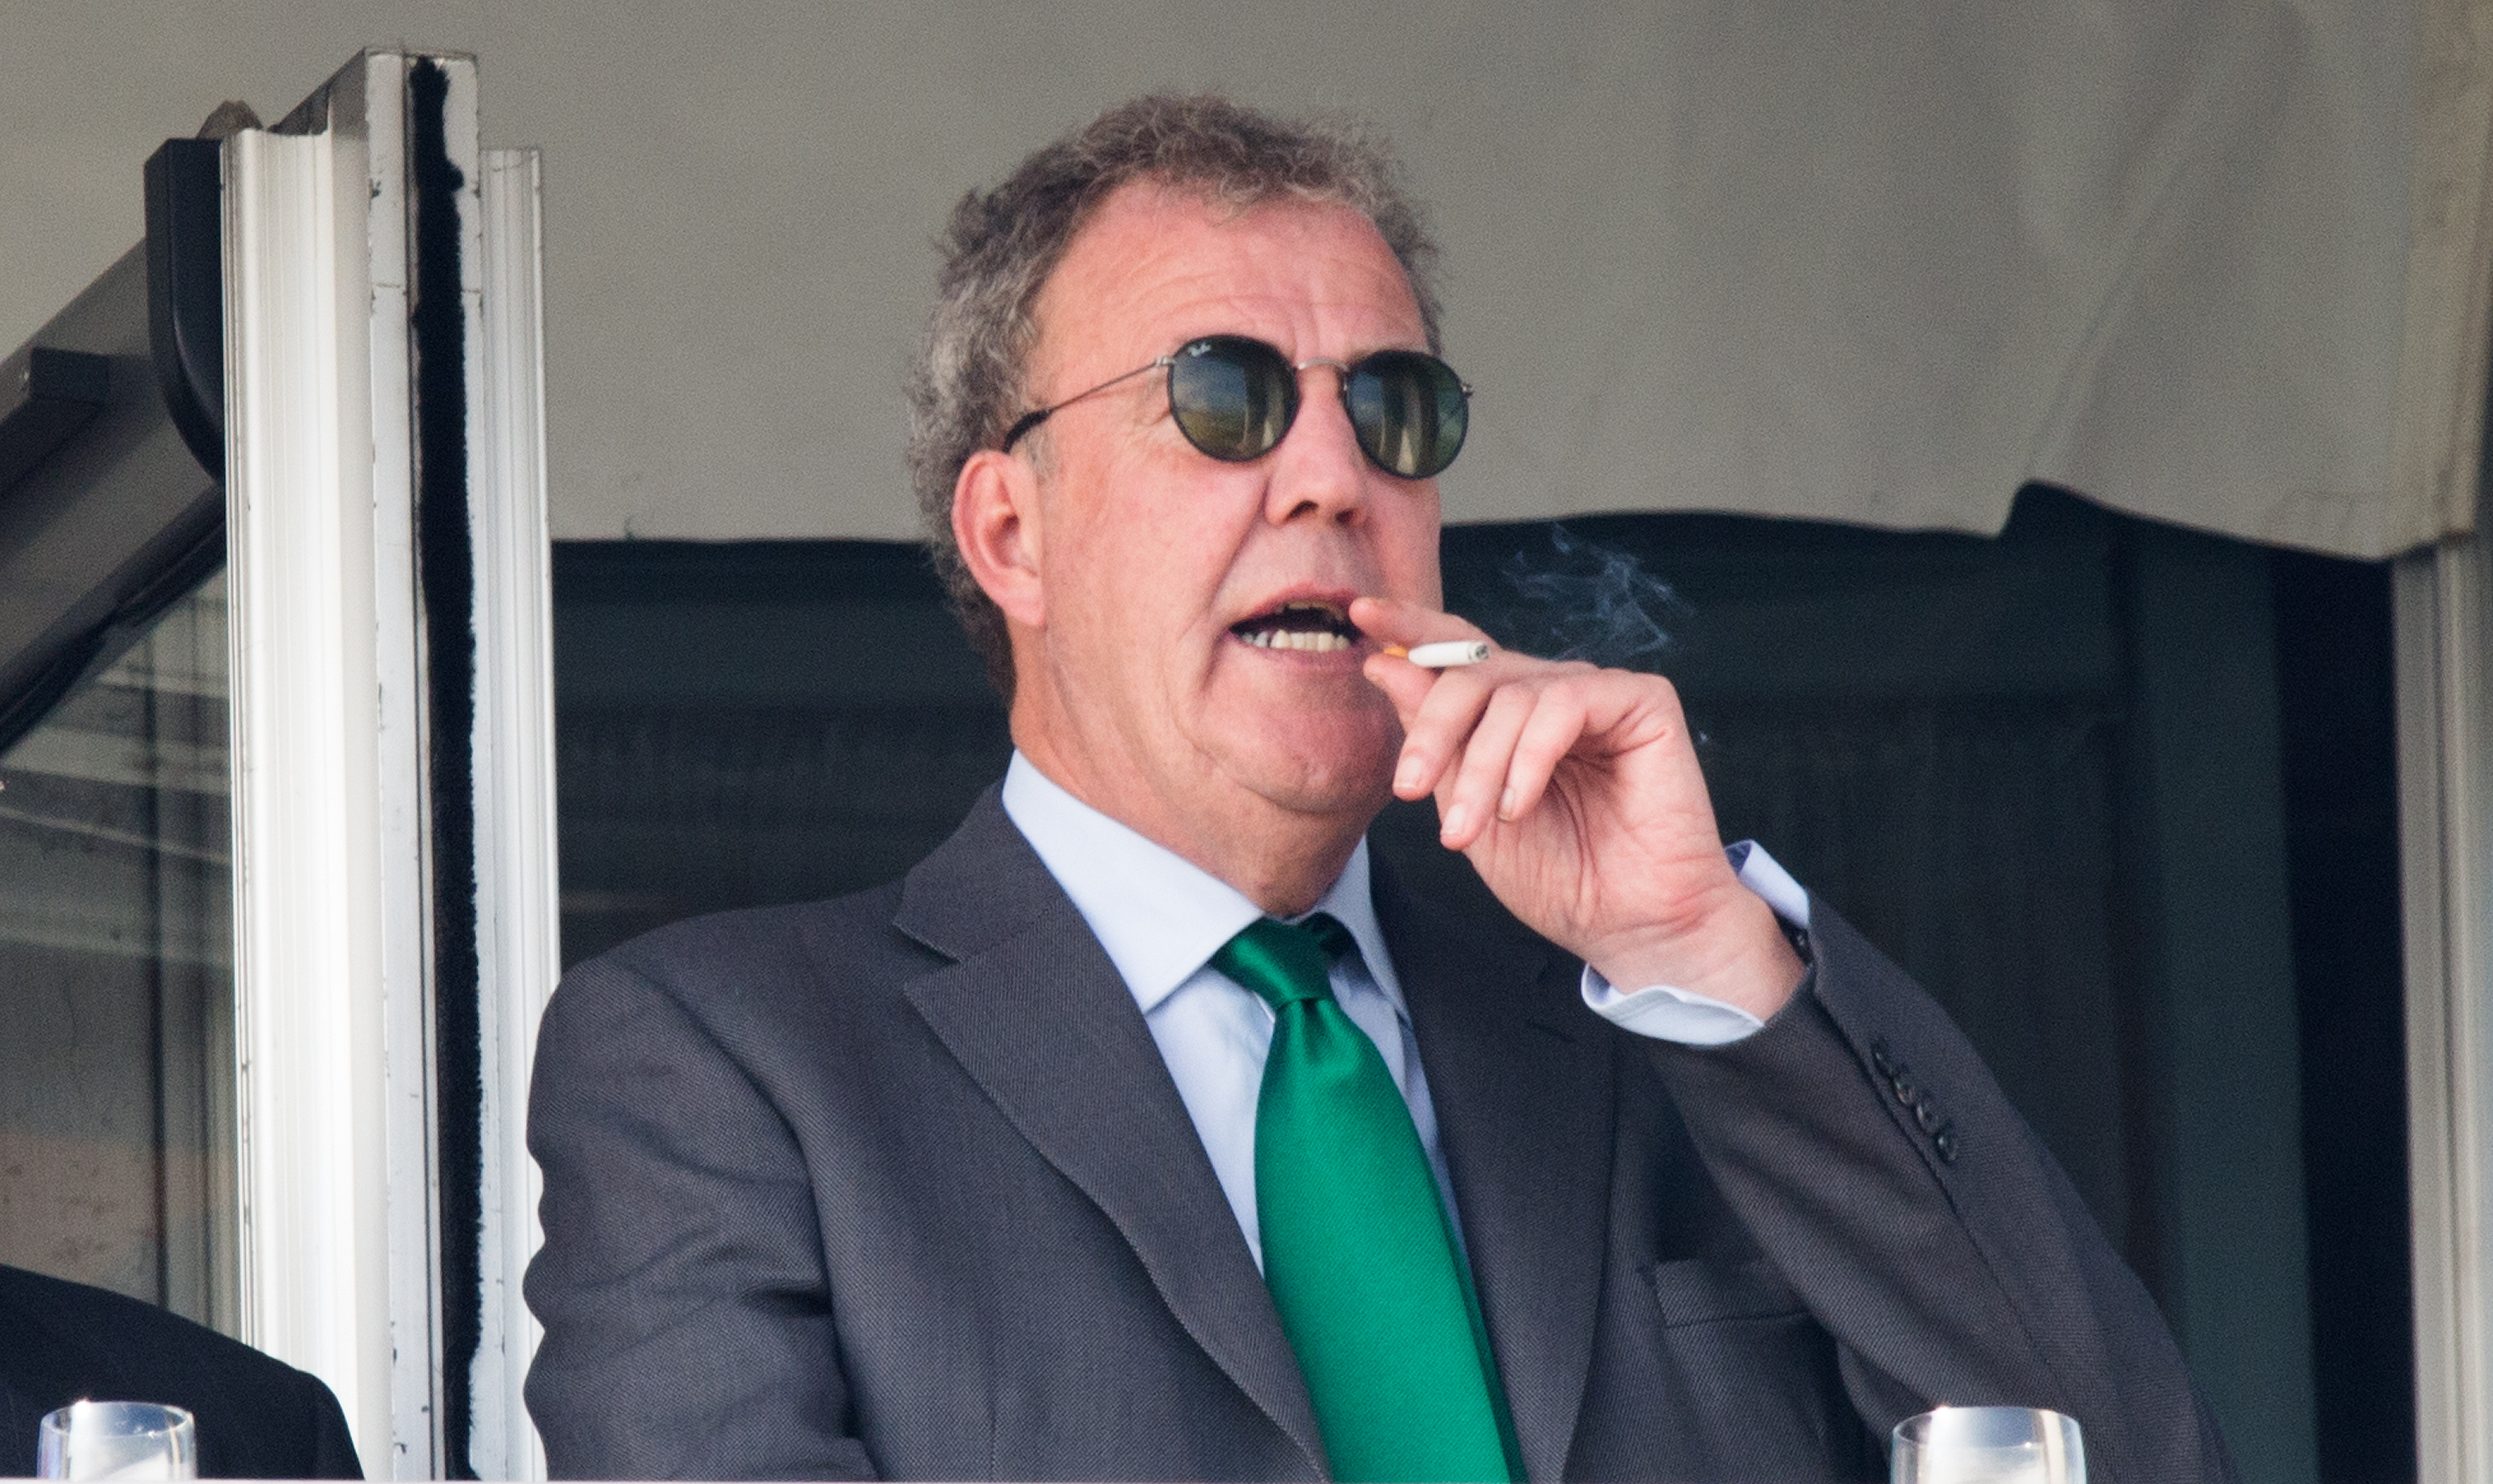 Jeremy Clarkson watches the races during Gold Cup day of the Cheltenham Festival at Cheltenham Racecourse on March 14, 2014, in Cheltenham, England (Samir Hussein—WireImage)